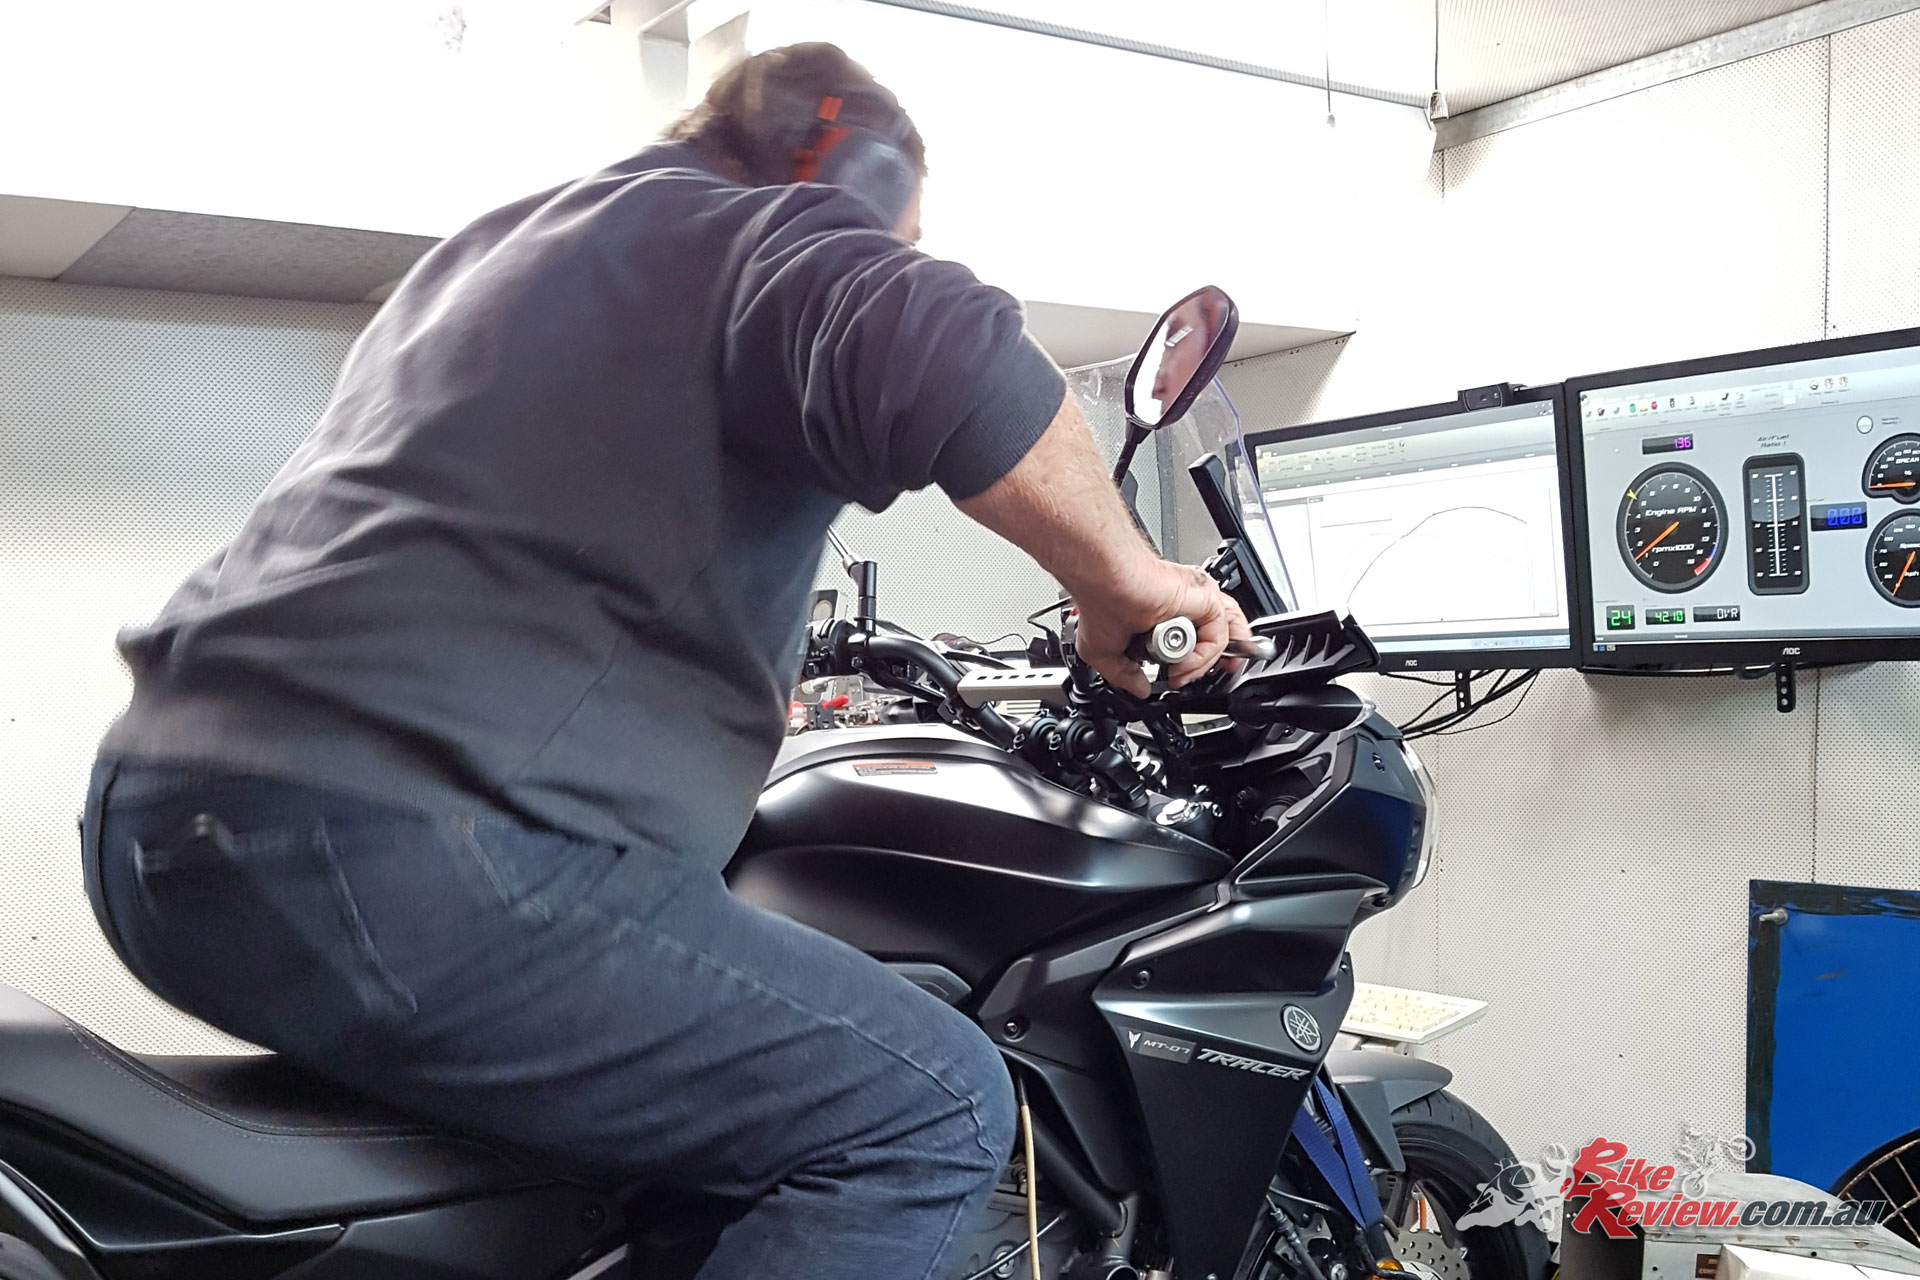 Staff Bike: DNA Airfilter added to our LT MT-07 Tracer - Dyno